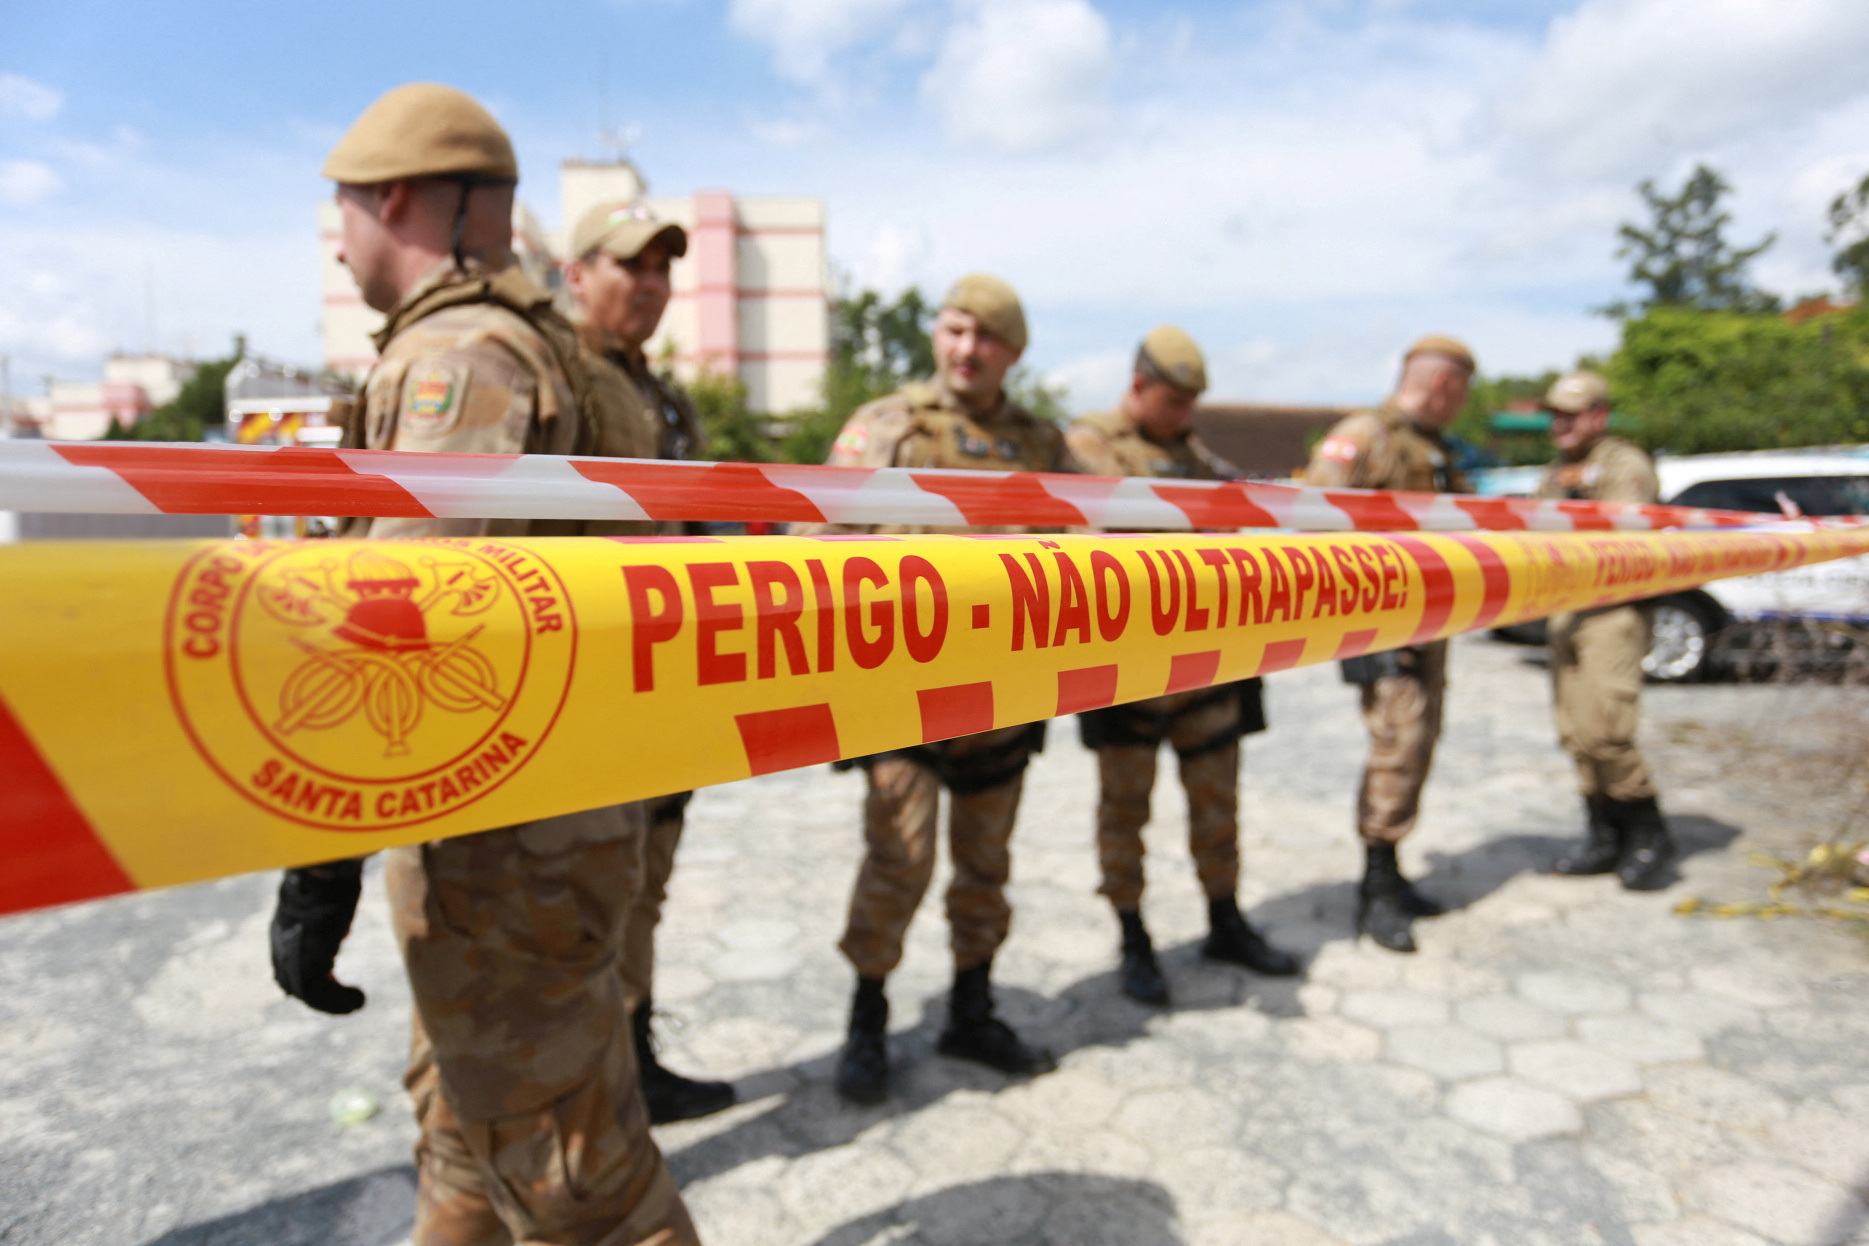 Military Police stands behind a cordon at the perimeter of a pre-school after a 25-year-old man attacked children, killing several and injuring others, according to local police and hospital, in Blumenau, in the southern Brazilian state of Santa Catarina, Brazil April 5, 2023. Photo: Reuters